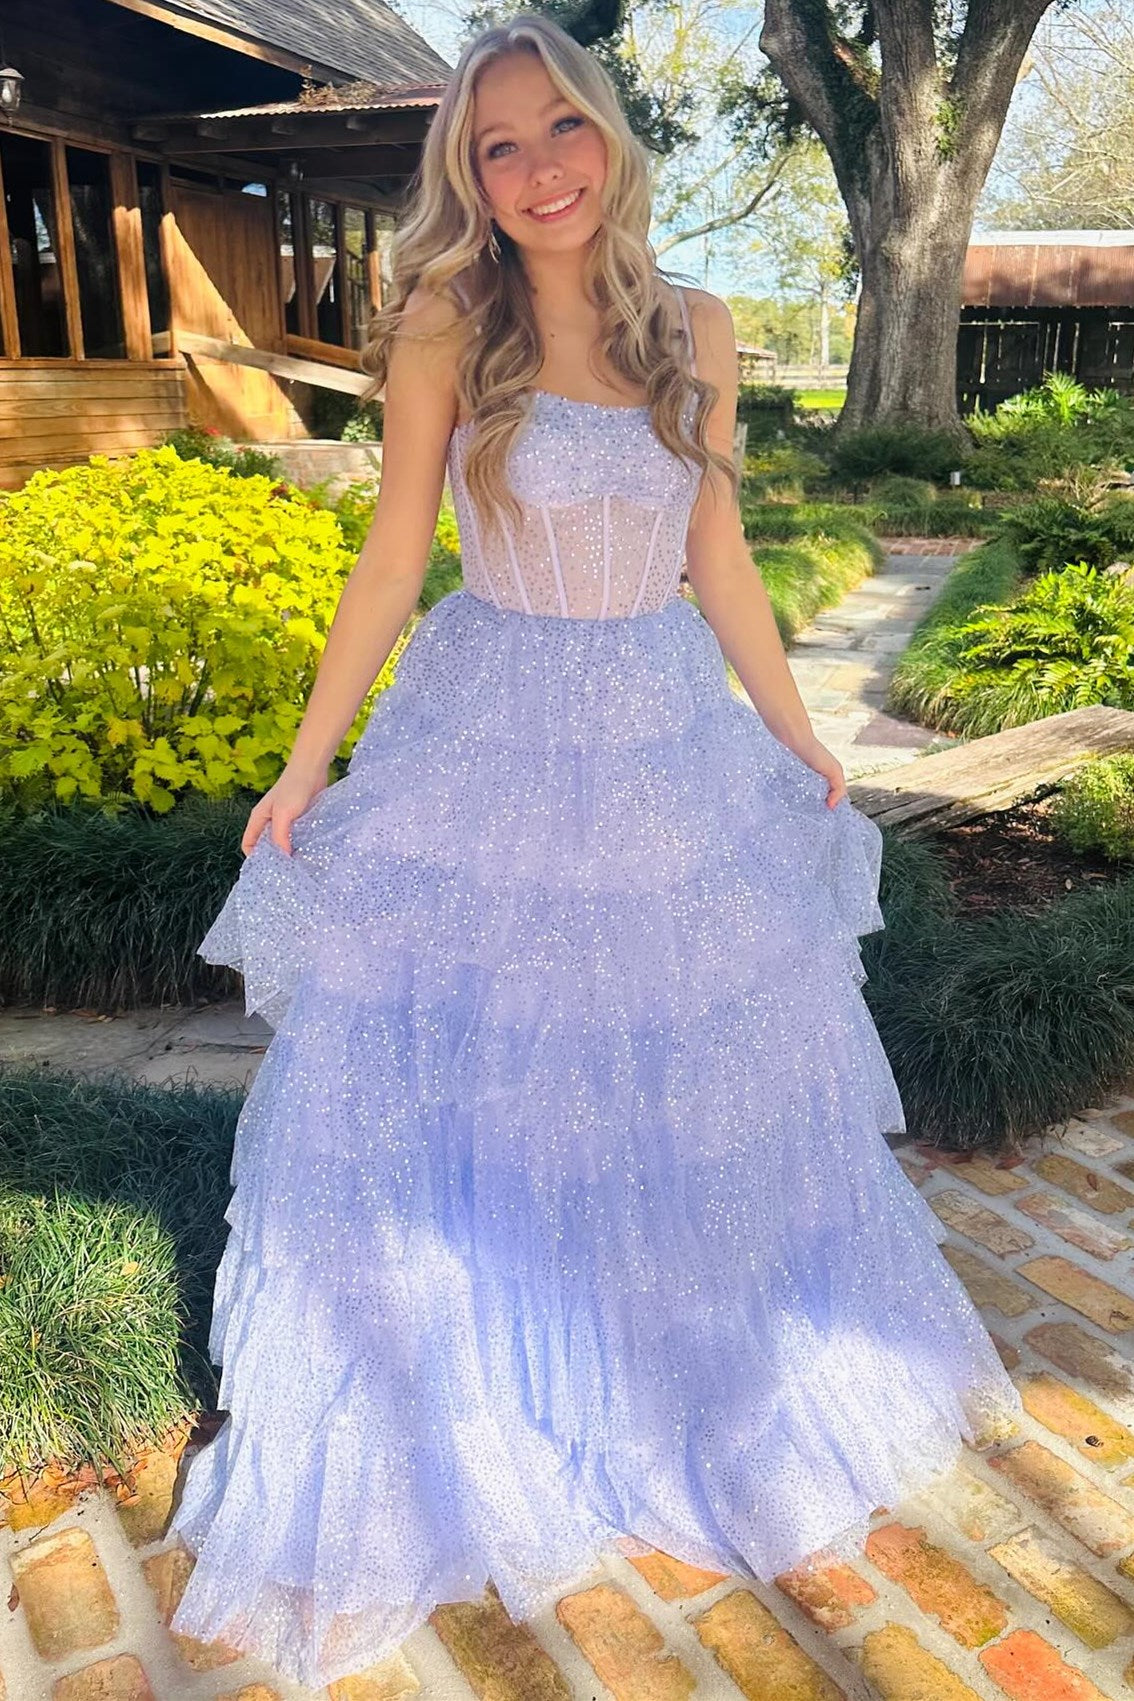 Lavender Tulle Sequin Ruffle Tiered Long Prom Dress